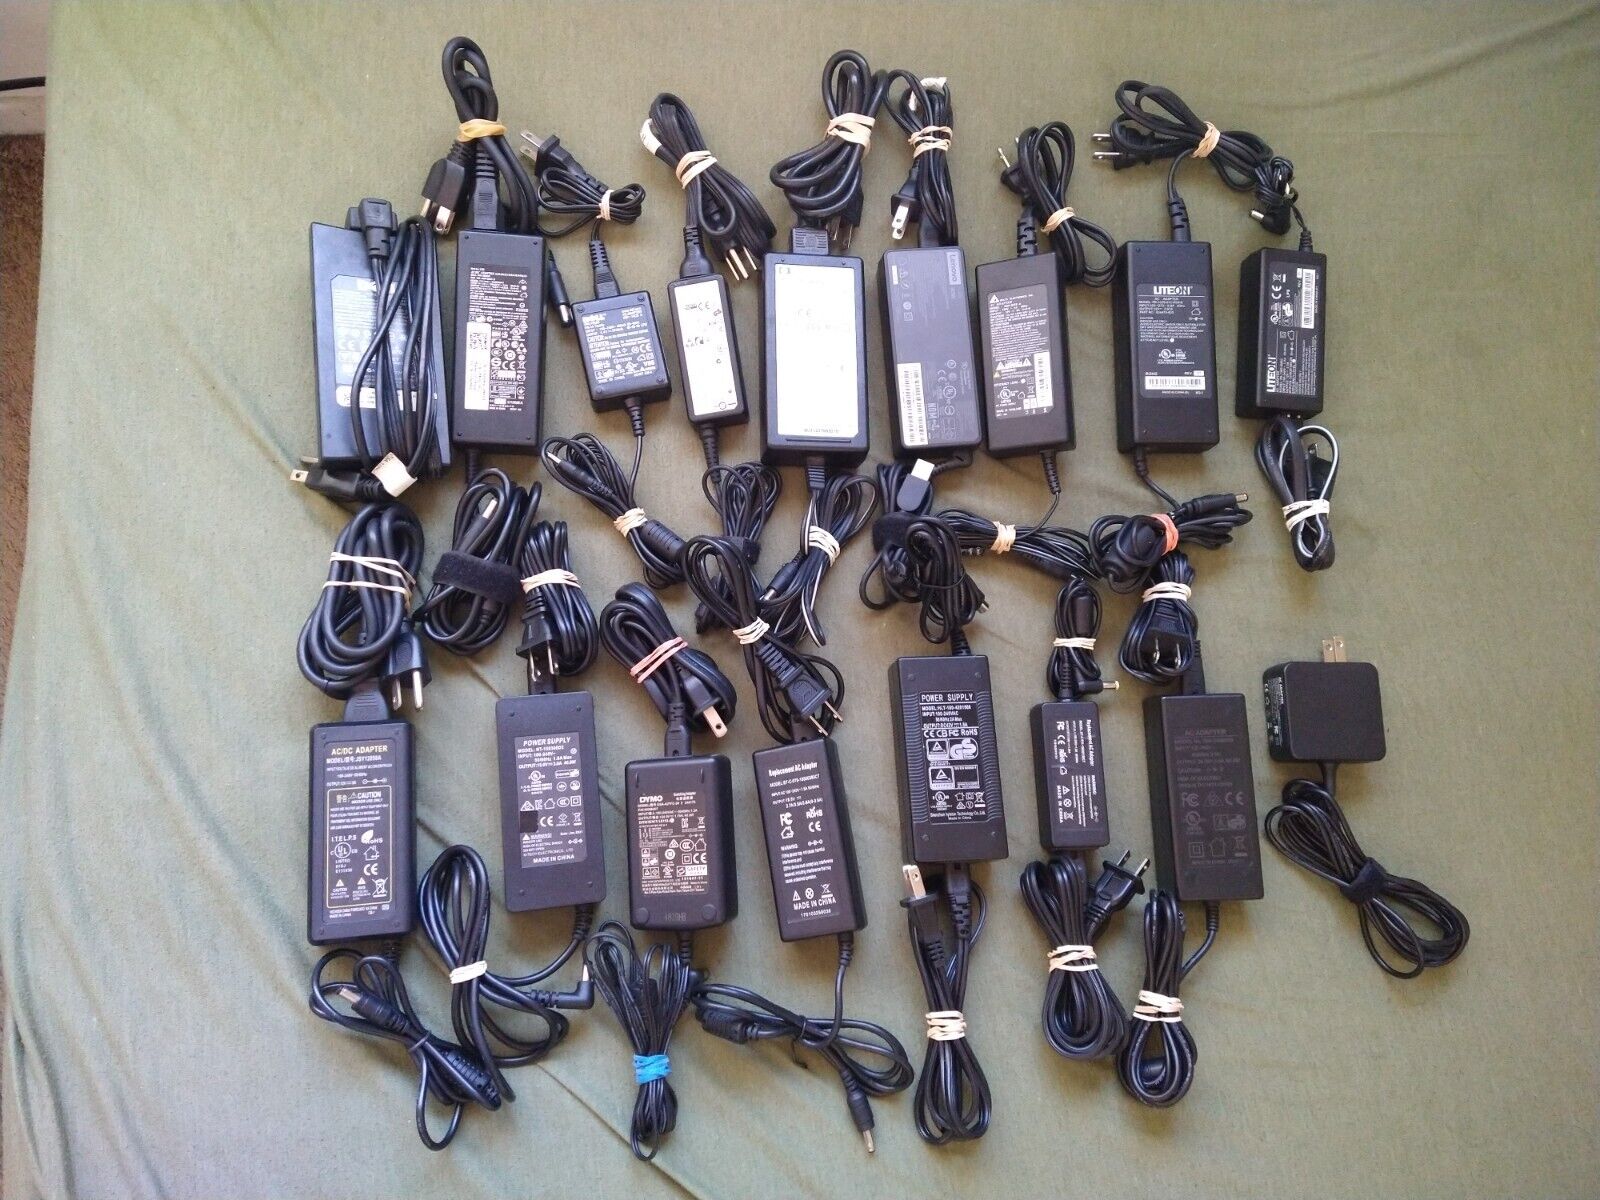 Lot of 17 Notebook Laptop Chargers Adapter Original And Generic Different Brands